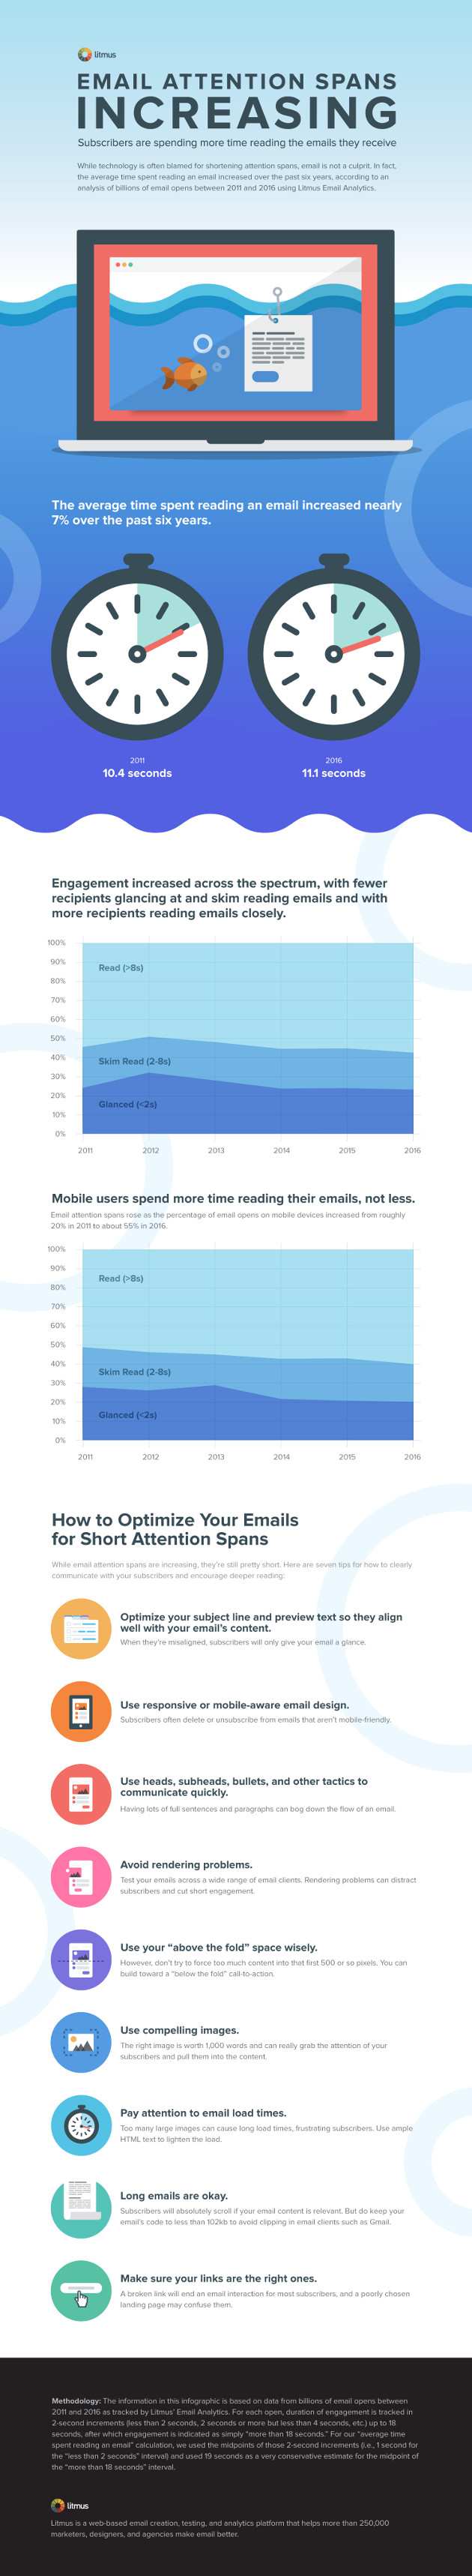 email-attention-spans-increasing